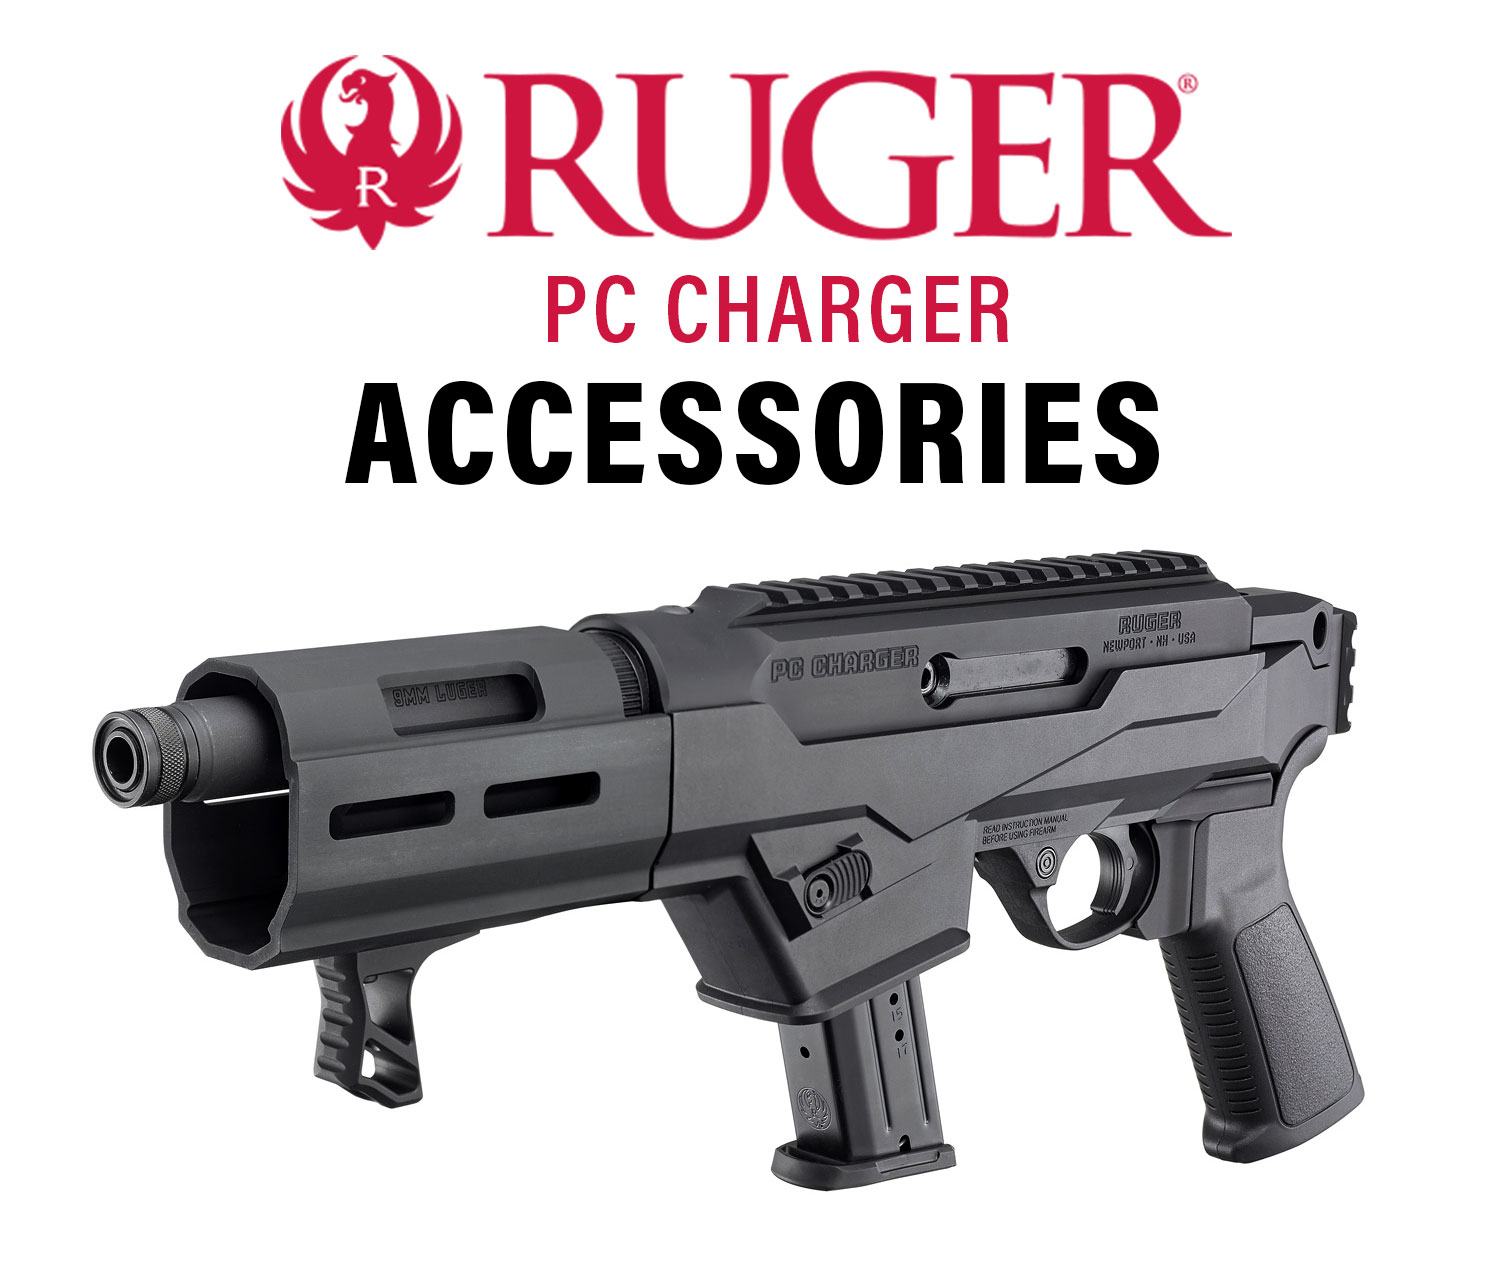 Ruger PC Charger Accessories